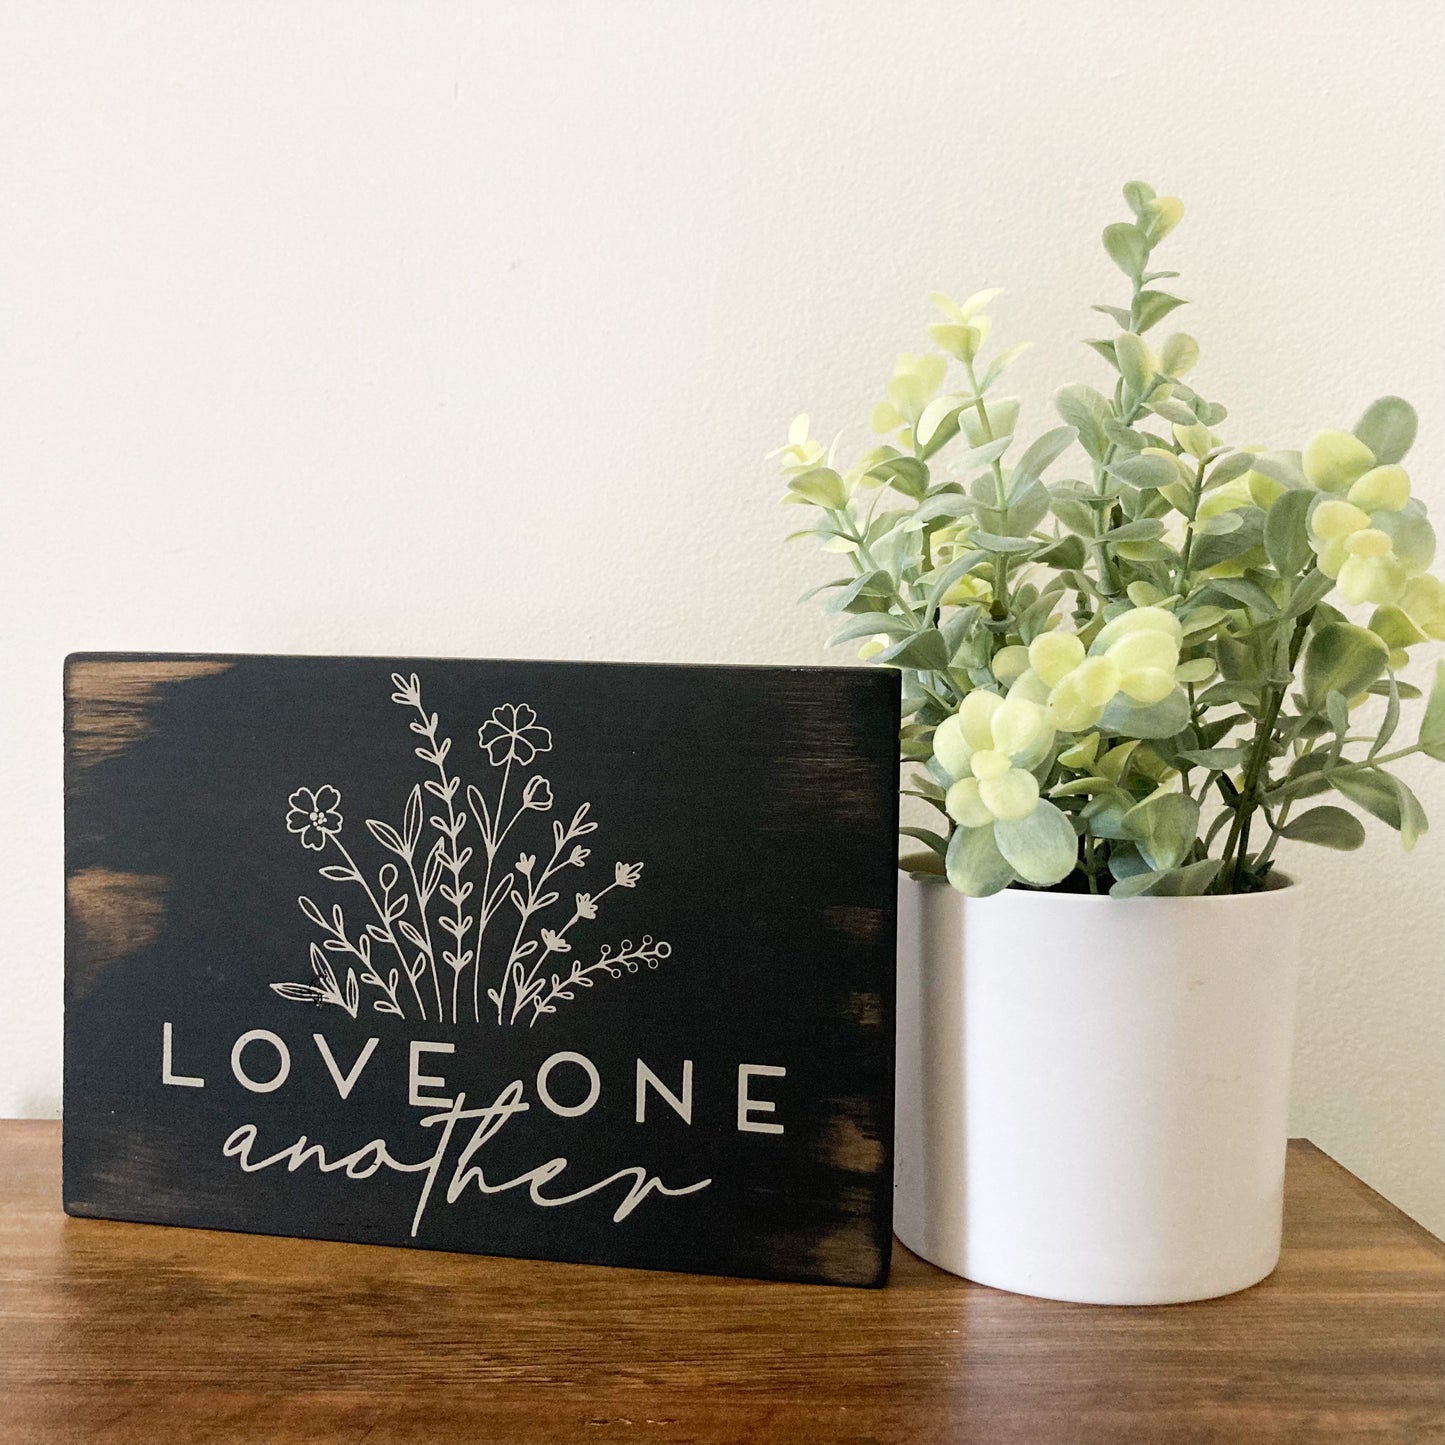 Handmade wood sign painted distressed black with flowers and words saying love one another in white 5.5 inches by 8 inches